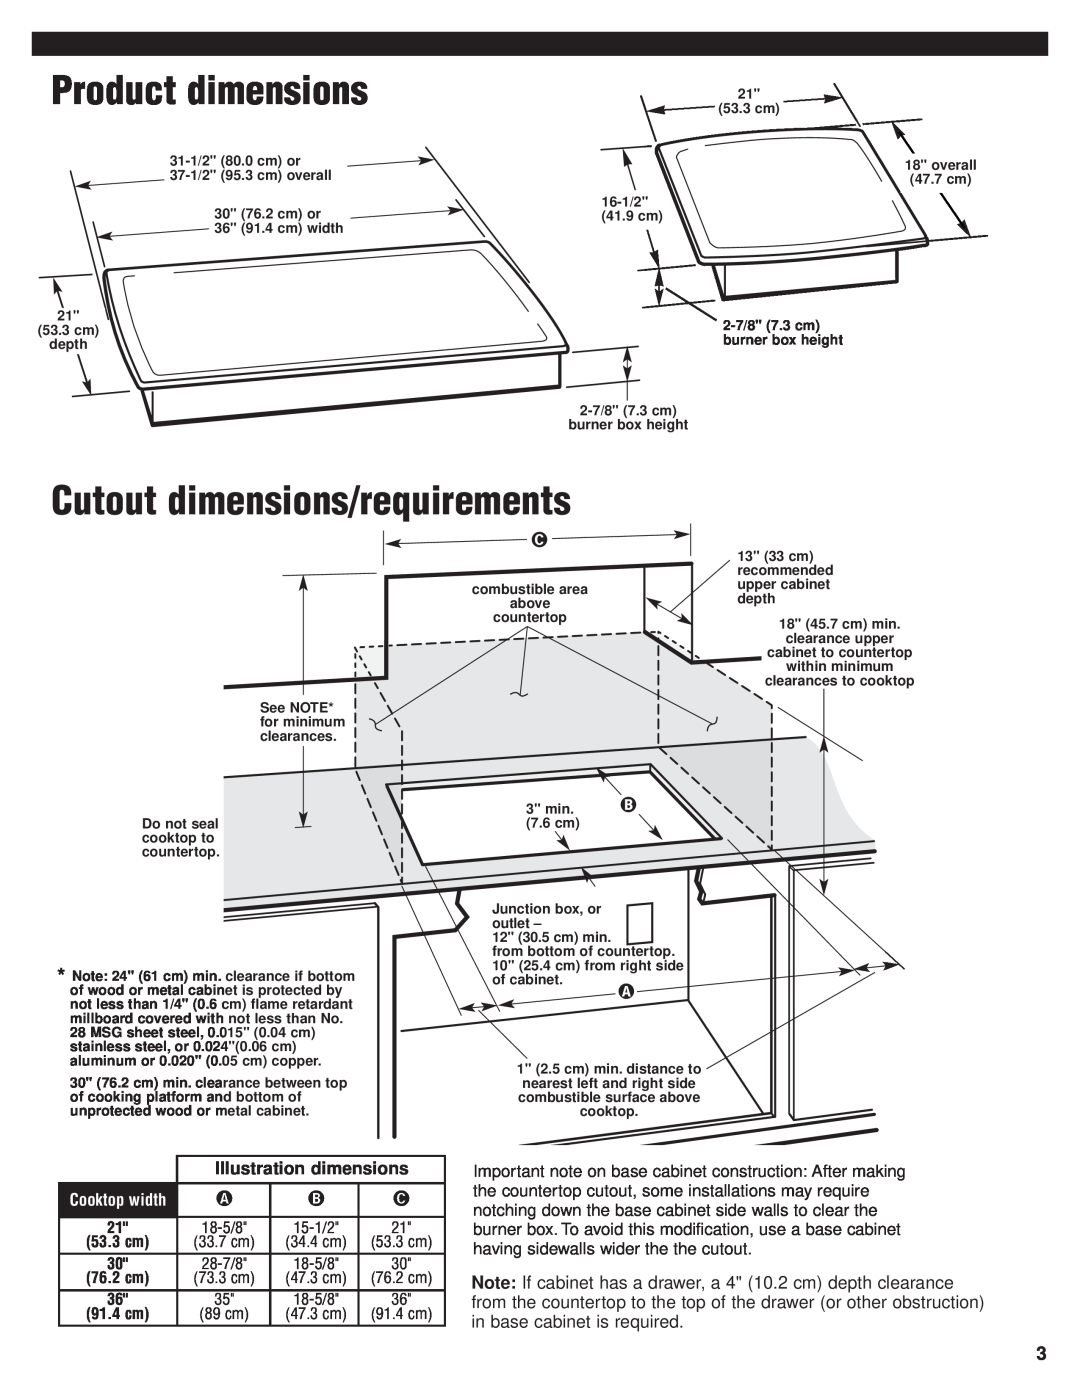 Whirlpool RCS2002GS1 installation instructions Product dimensions, Cutout dimensions/requirements, Illustration dimensions 